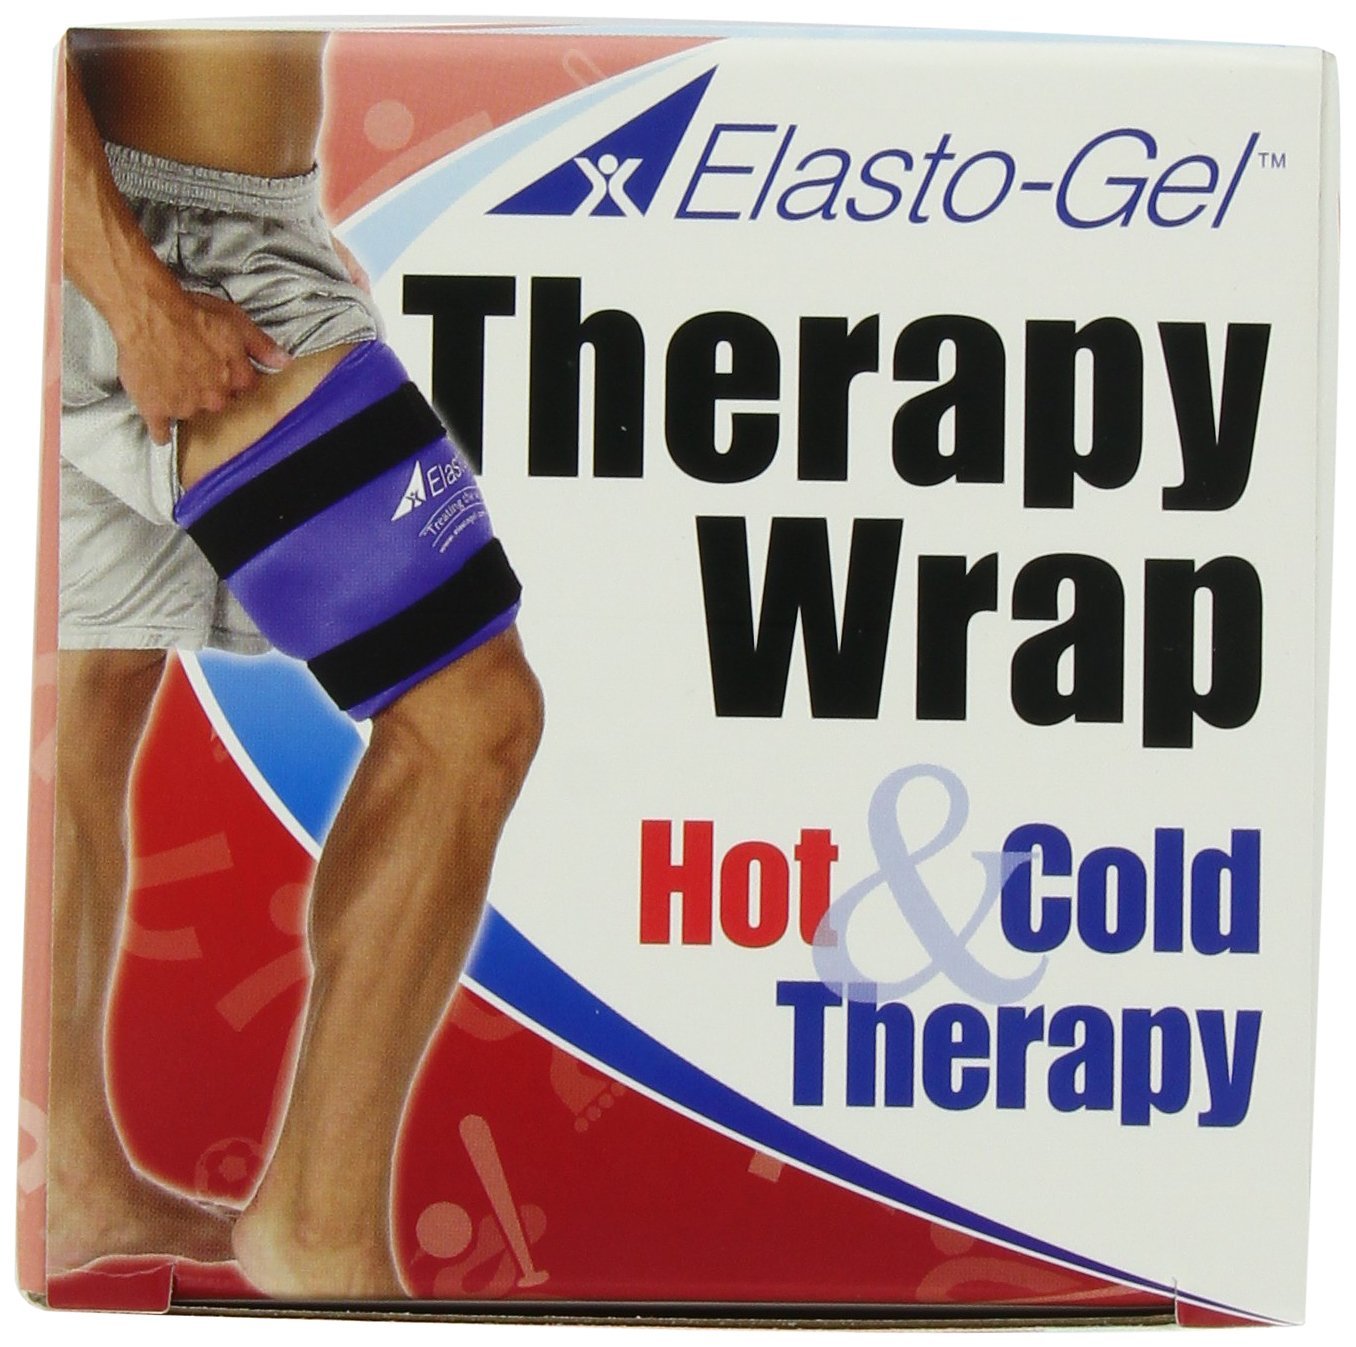 Review of Elasto-Gel All Purpose Hot/Cold Therapy Wrap